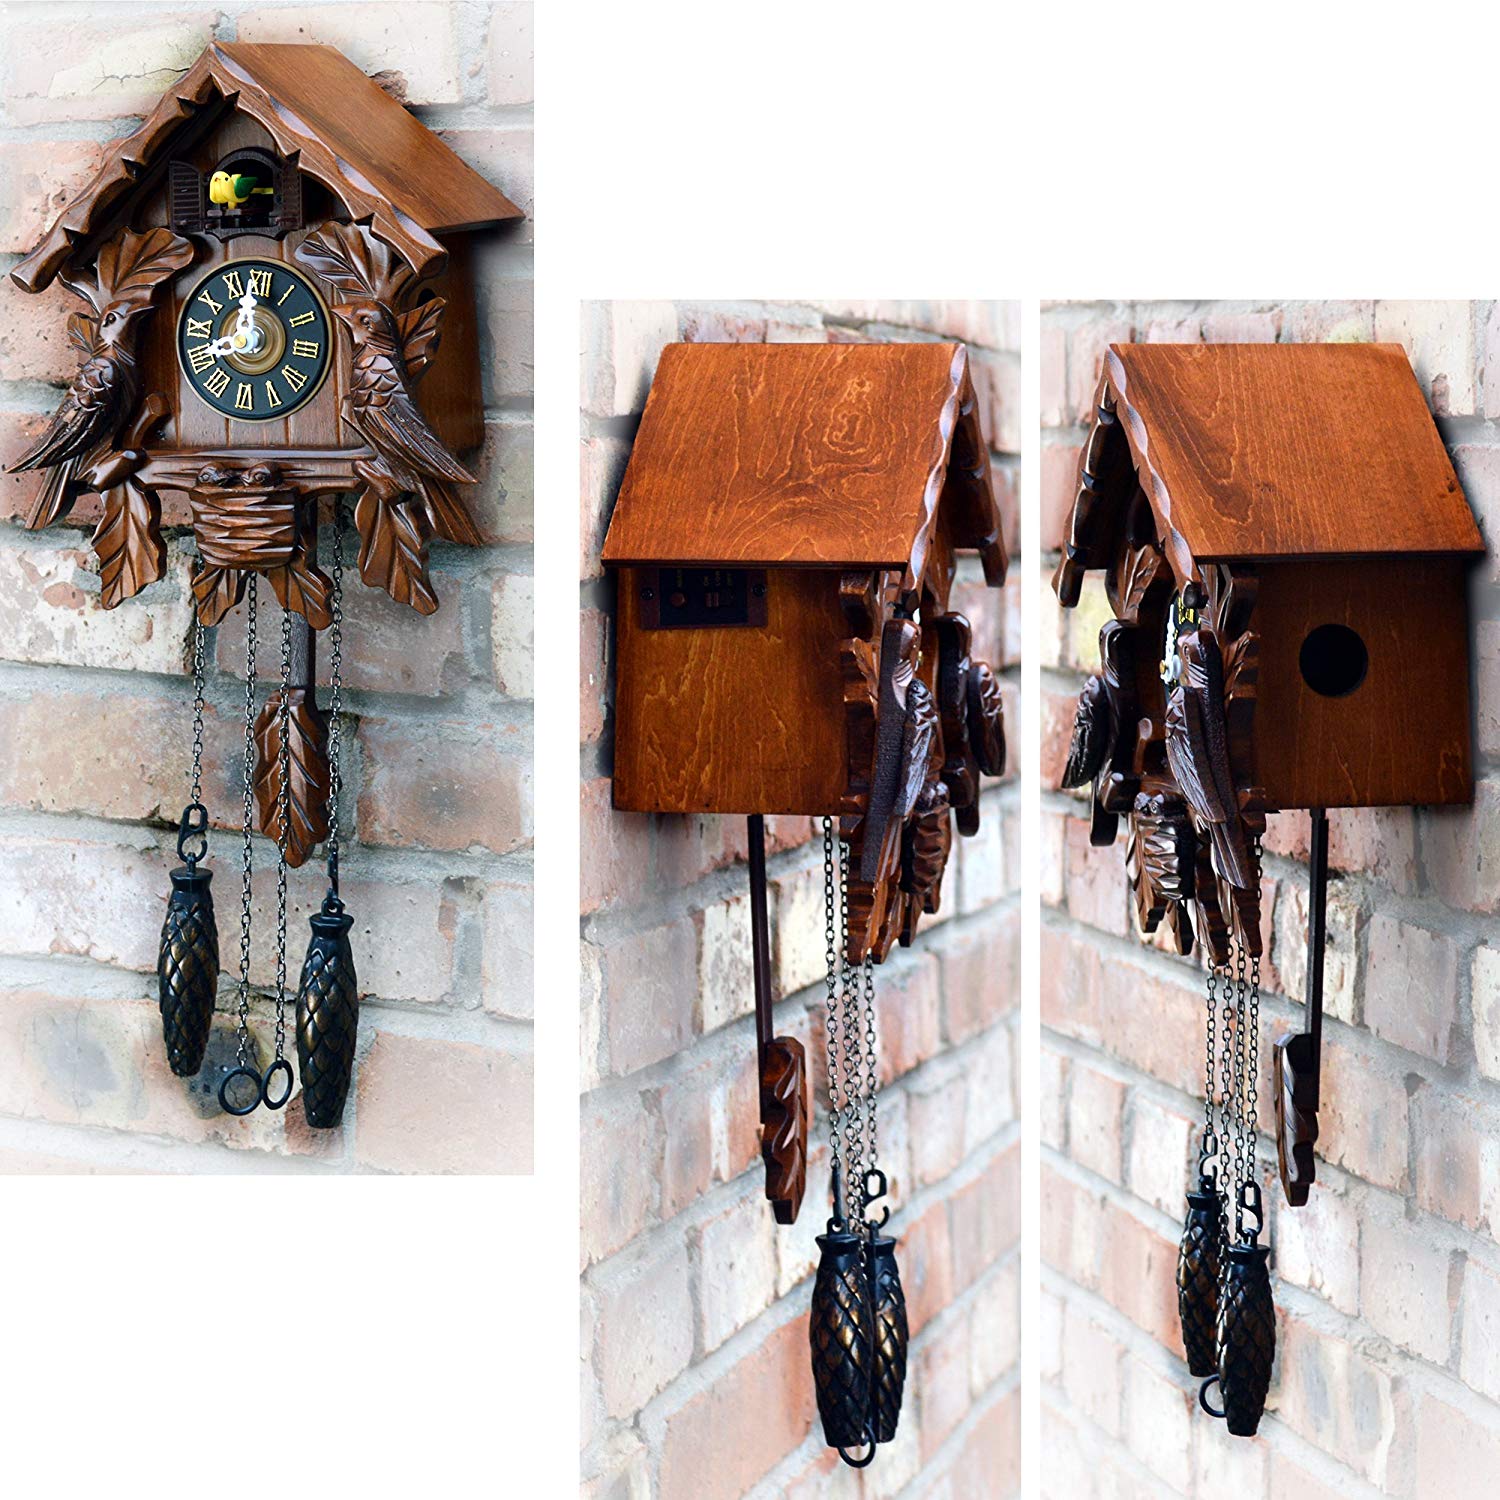 TransSino Treasures Traditional Wooden Clock with Quartz Movement and Cuckoo Chirping.jpg A cuckoo clock of cabin design with genuine wood carving on plywood case, comes with a wooden pendulum and 2 weight ornaments. For more details, visit- https://www.amazon.com/gp/product/B00QRETYT6 by TransSinoTreasures